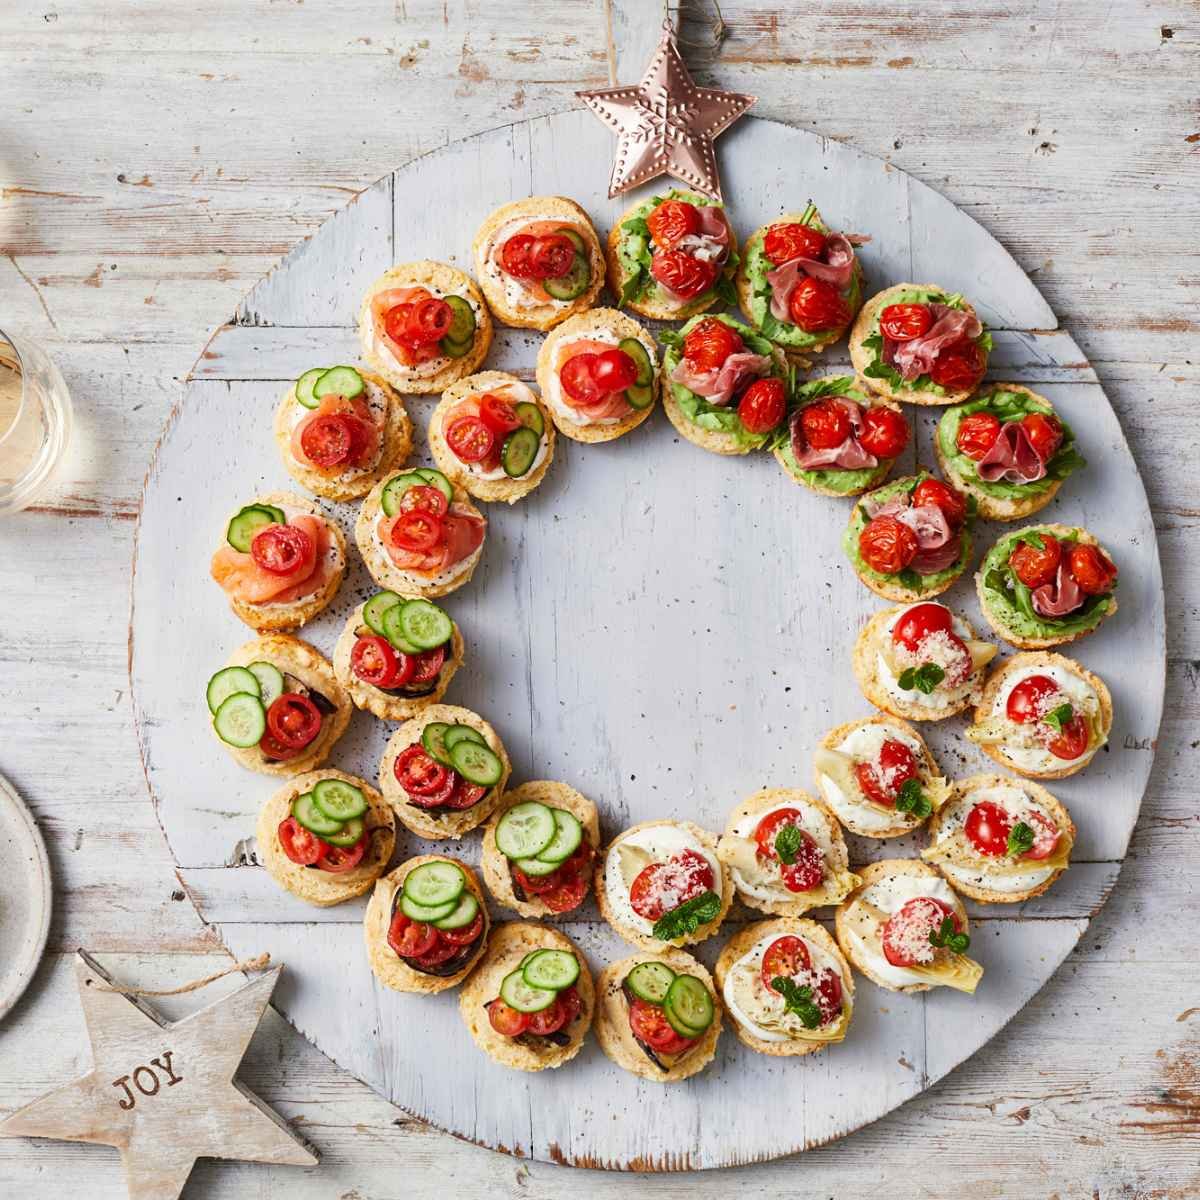 A wreath made out of scones, topped with solanato tomatoes, and qukes cucumbers on a white board.